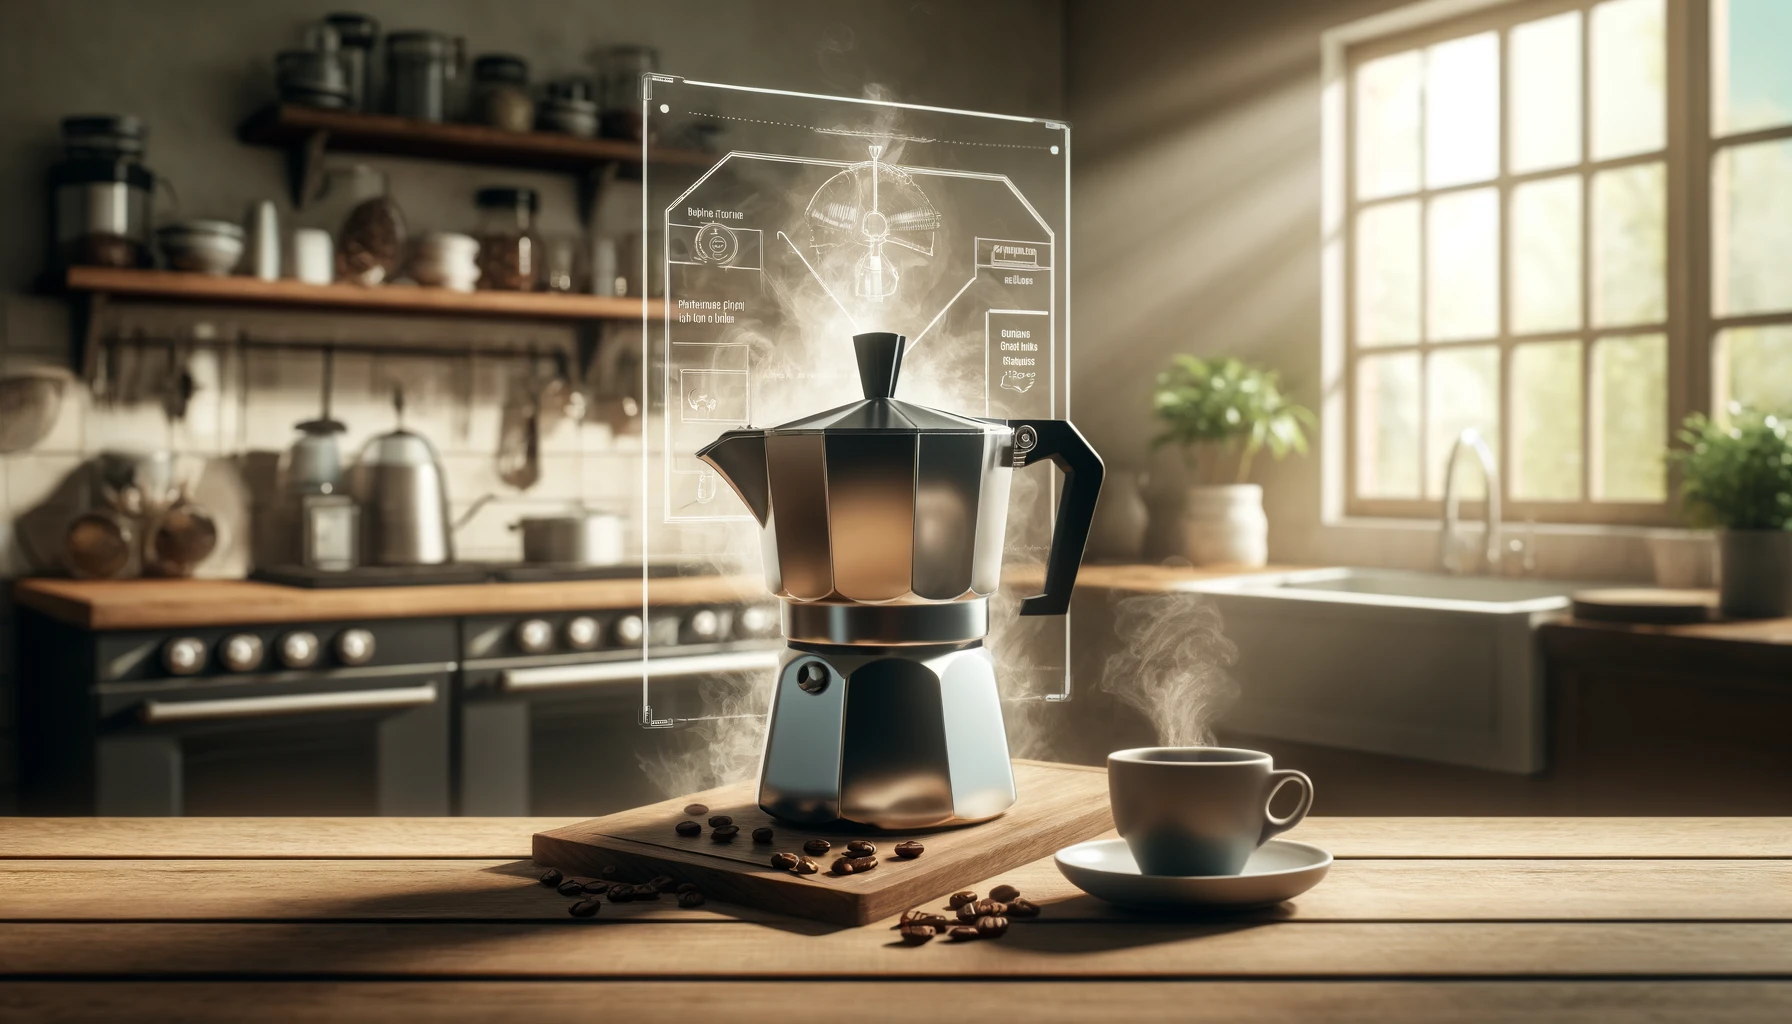 A modern espresso maker with steam and coffee beans on a kitchen counter, evoking a warm, inviting aroma, with a diagram created wit PUML